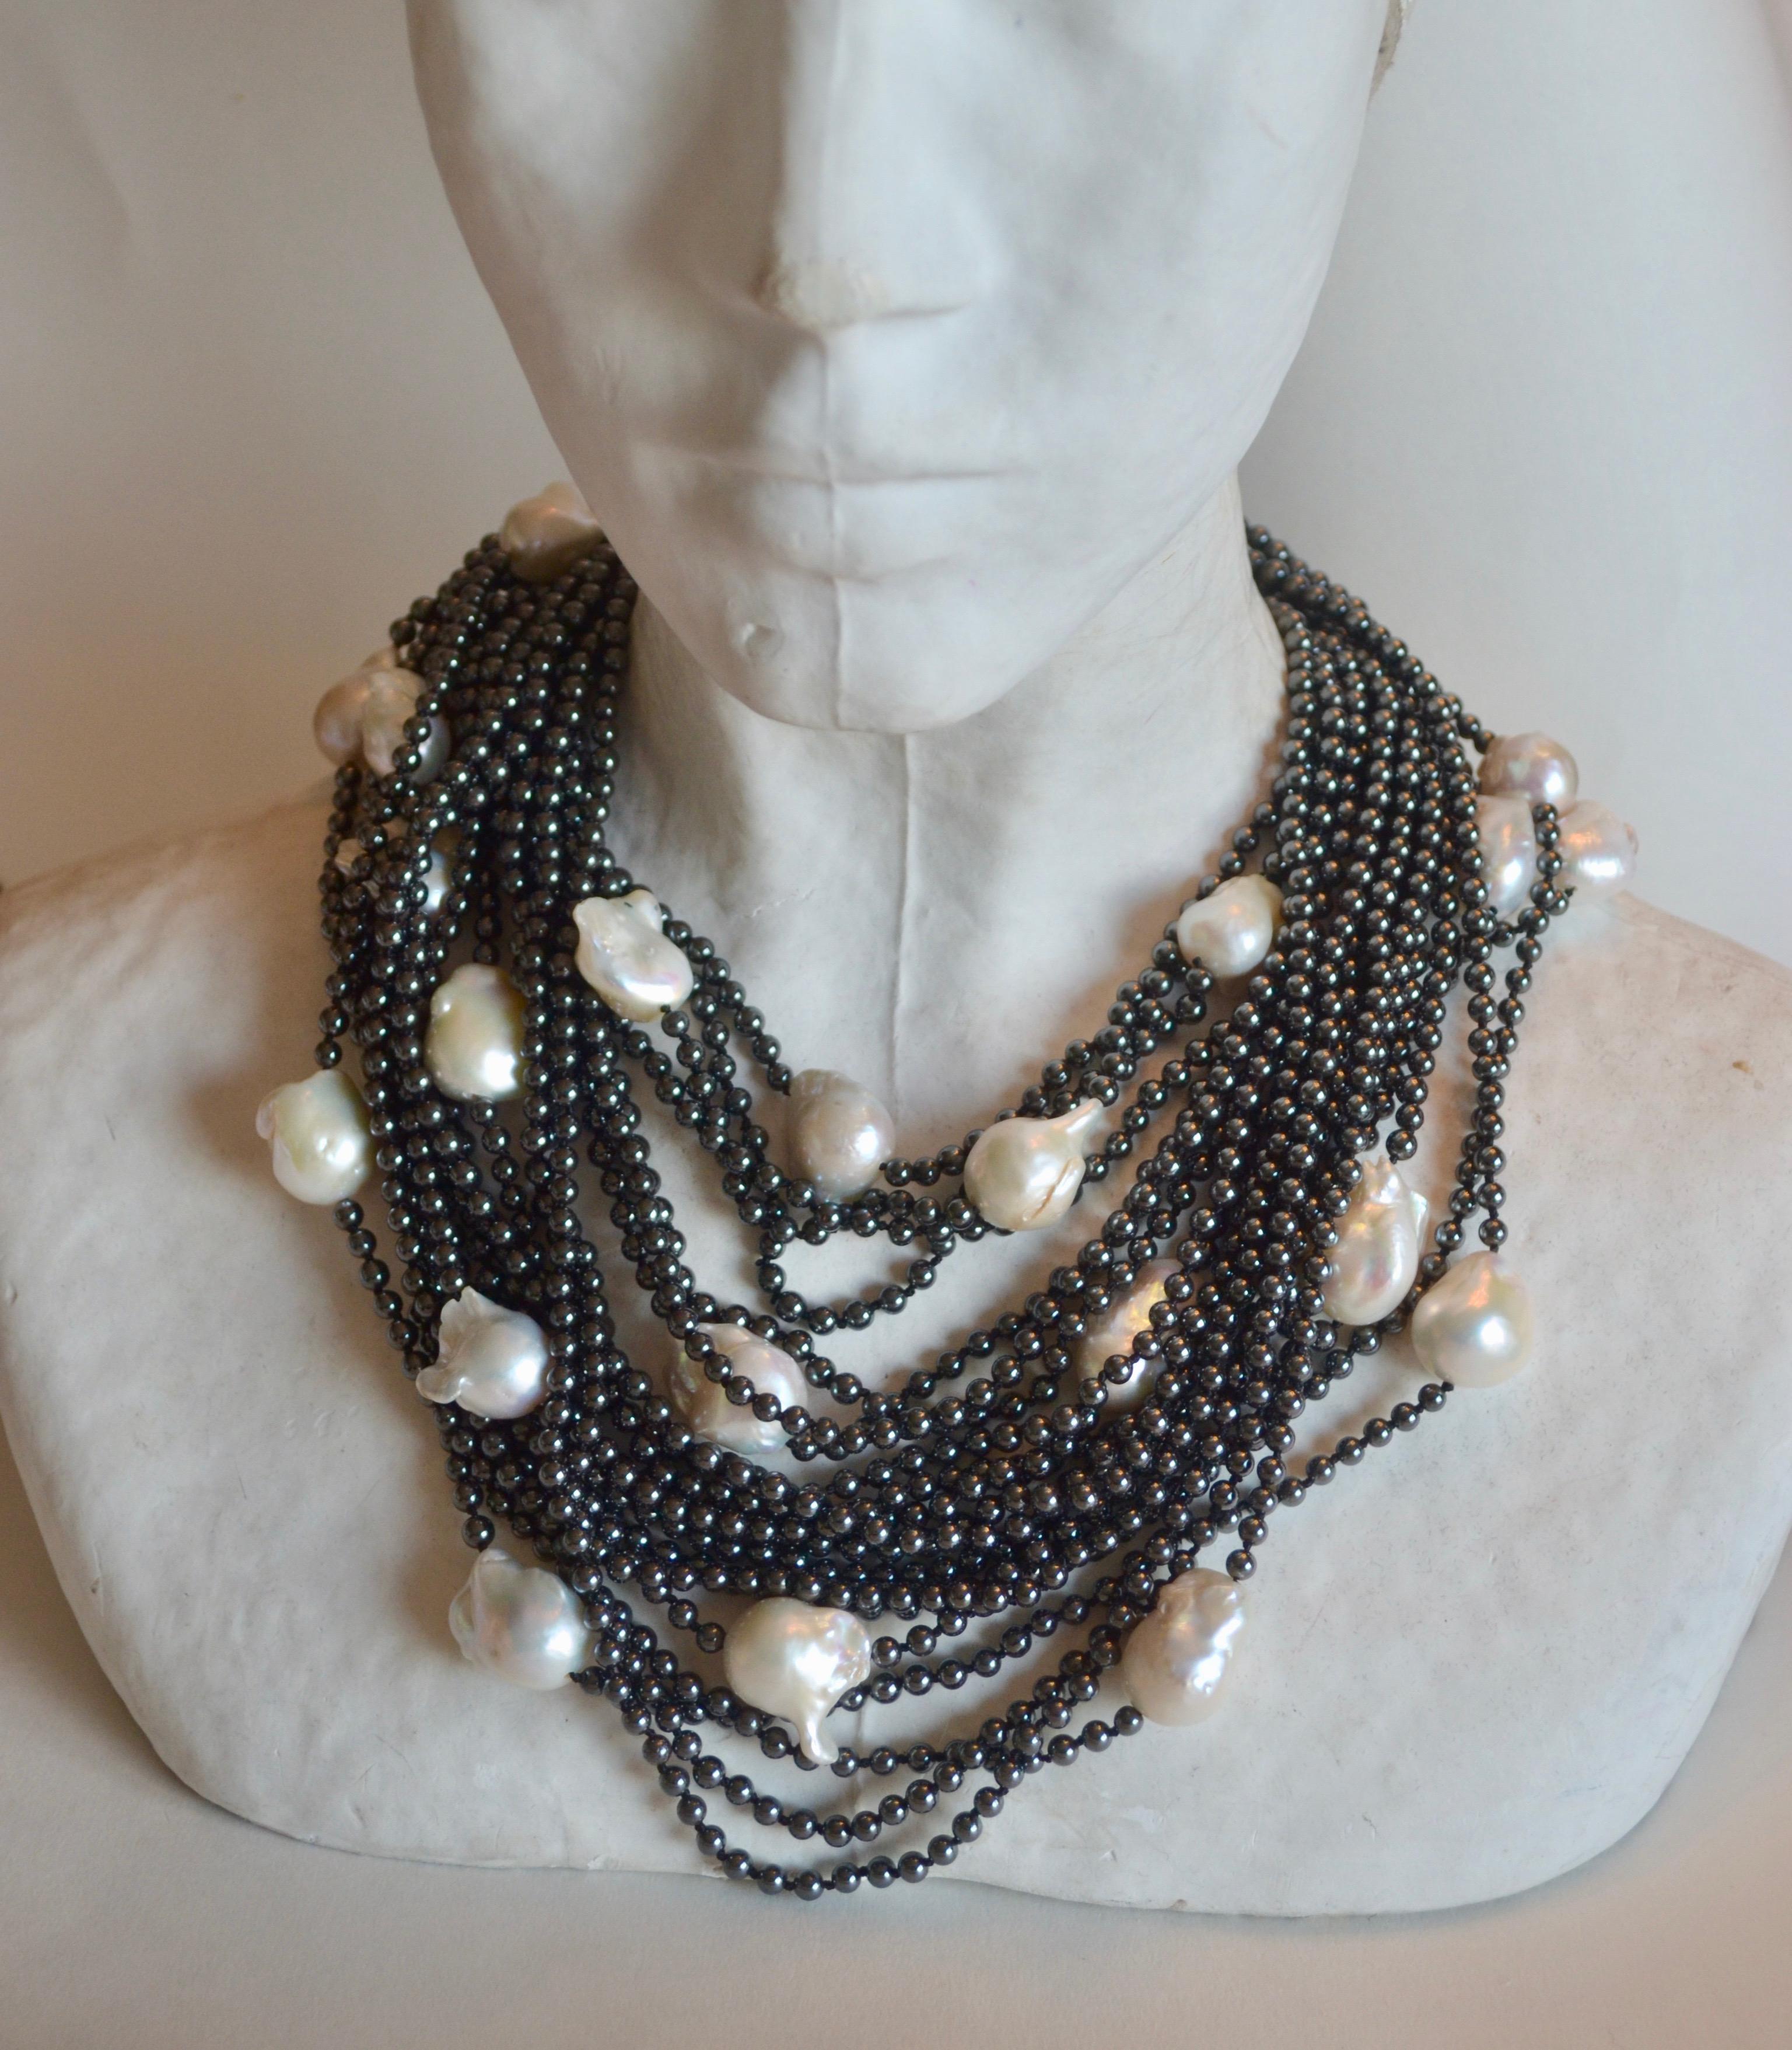 Small round hematite bead and large white baroque pearl 20 strand necklace with sterling silver round clasp from Patricia von Musulin. 